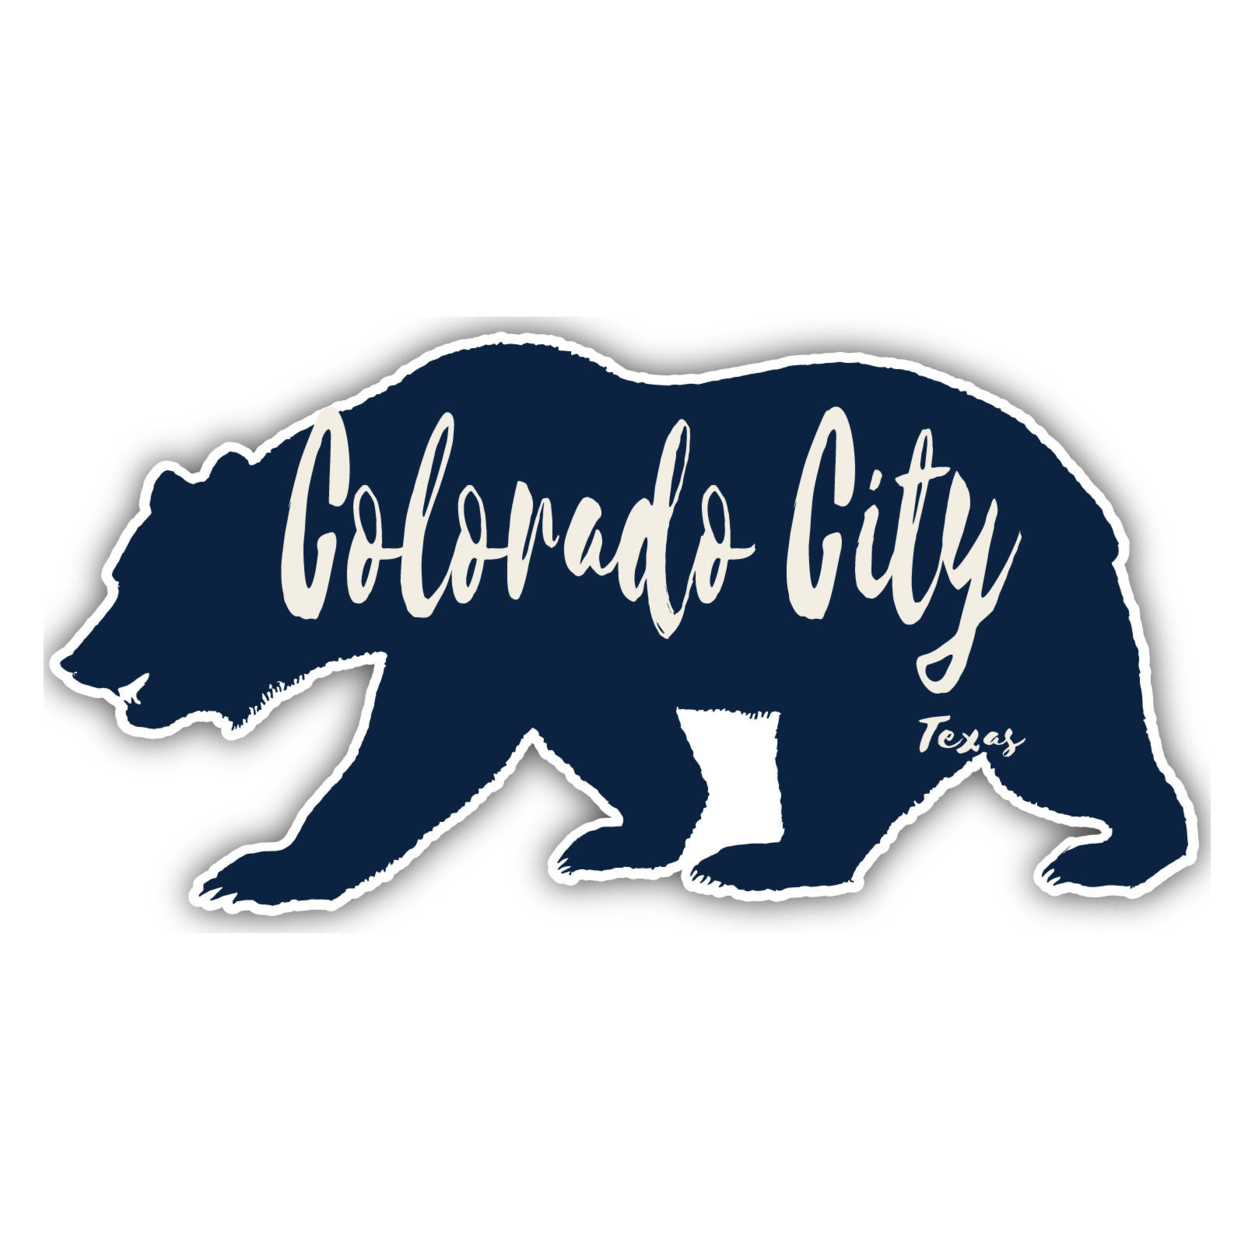 Colorado City Texas Souvenir Decorative Stickers (Choose Theme And Size) - 4-Pack, 10-Inch, Great Outdoors